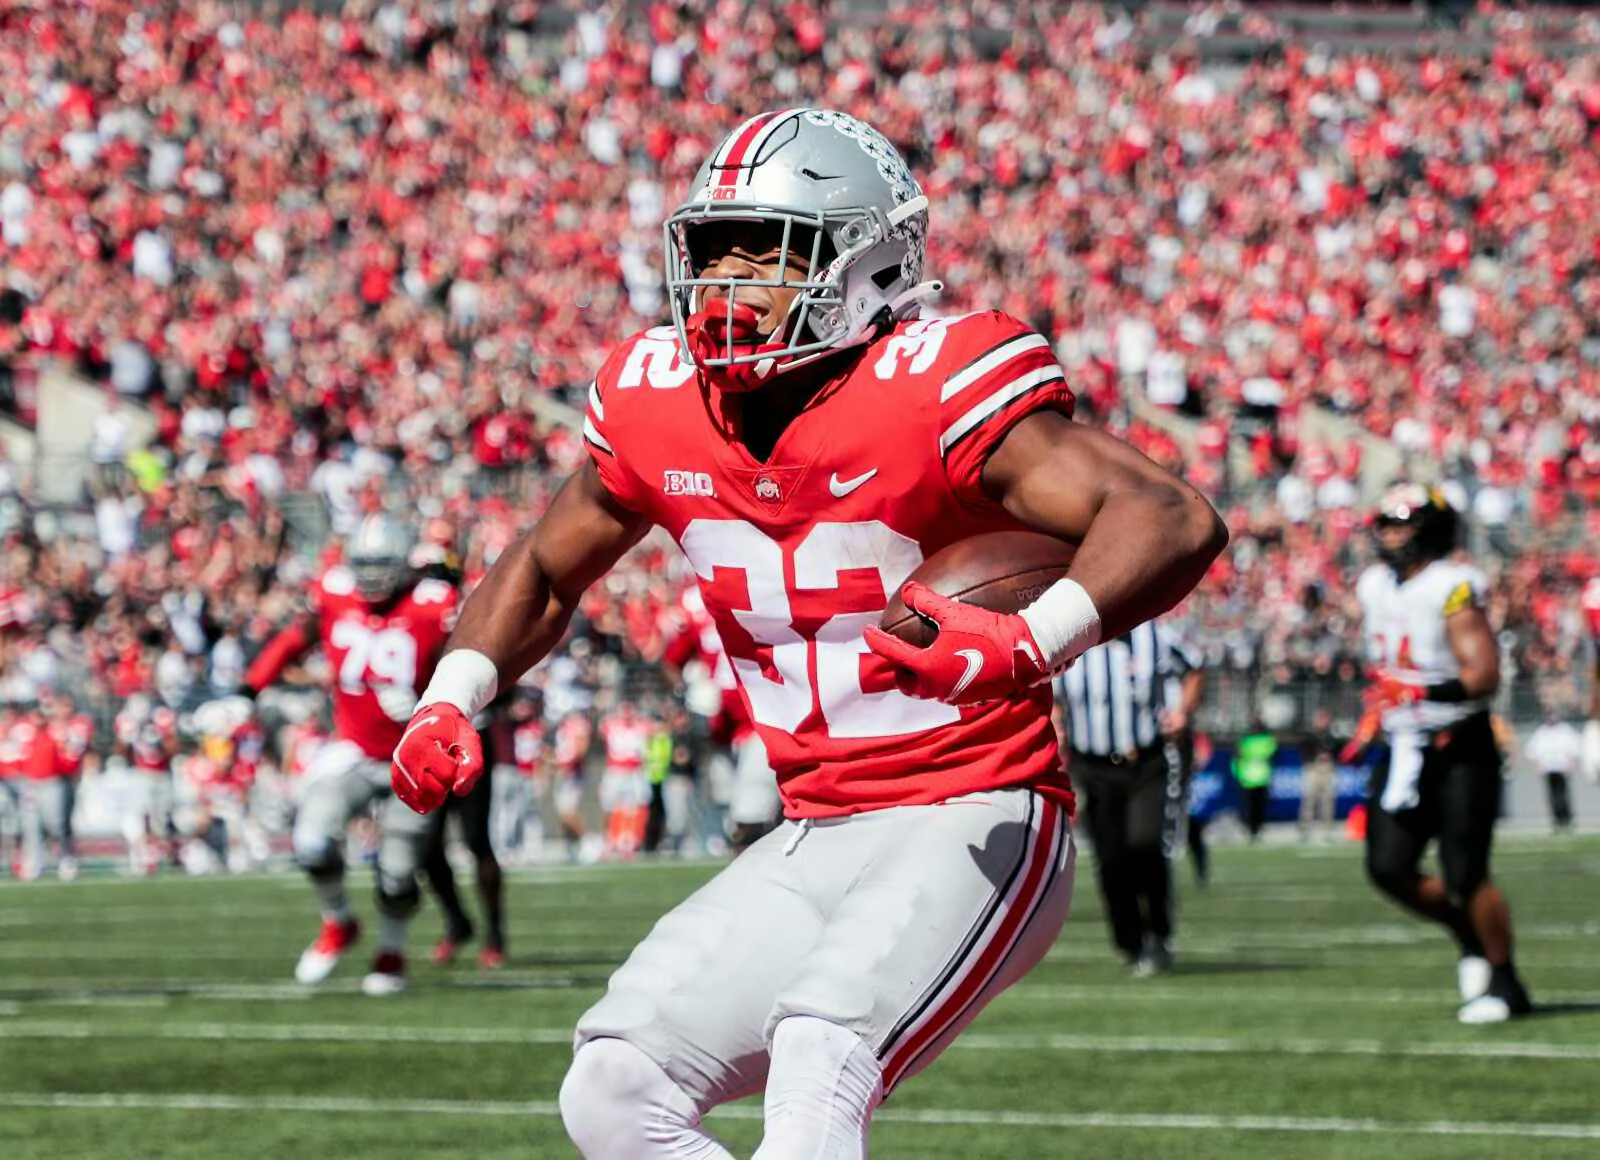 College football power rankings: Top 10 running backs for the 2022